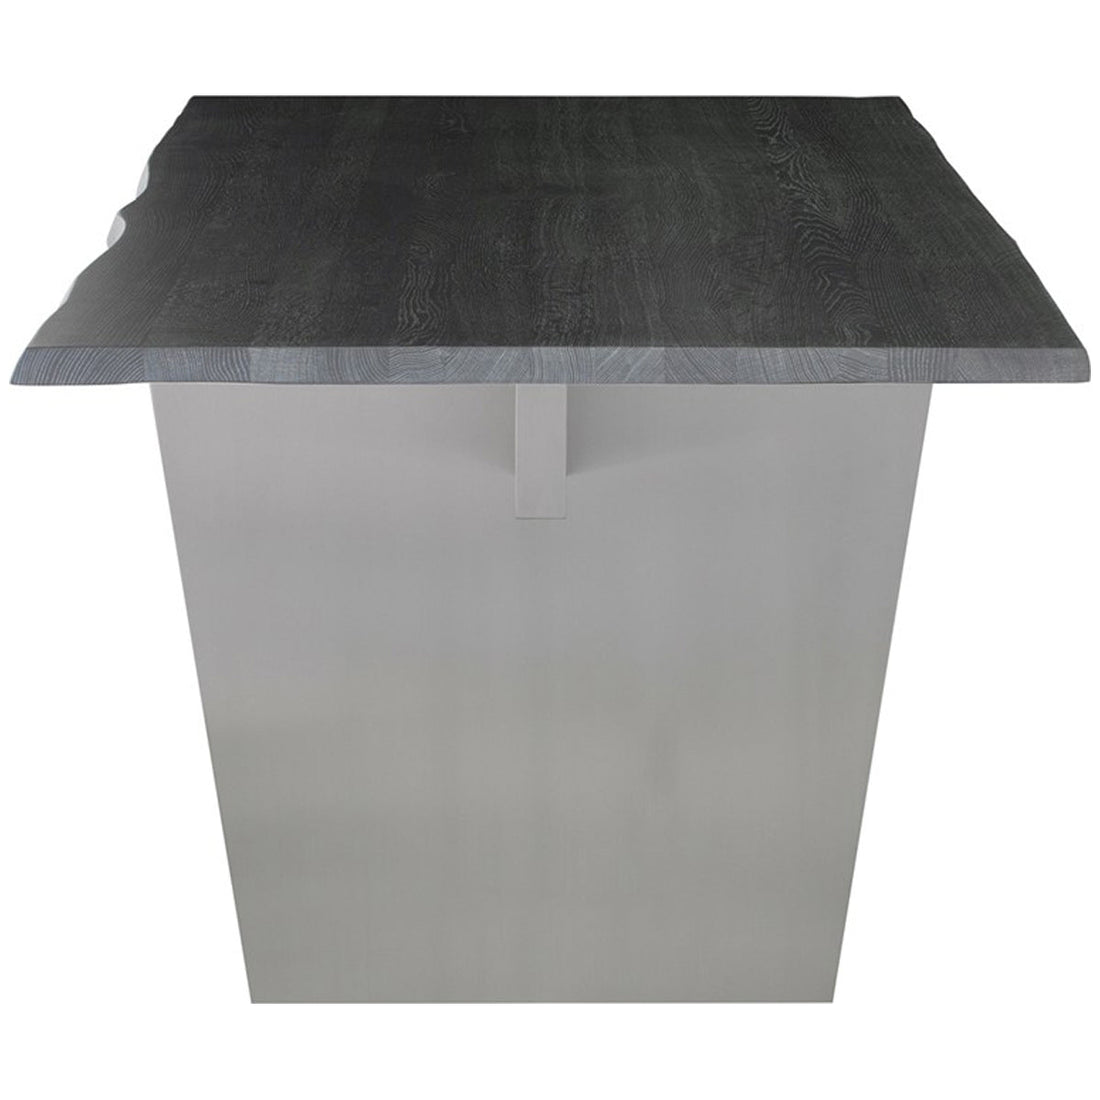 Nuevo Living Aiden Brushed Stainless Dining Table